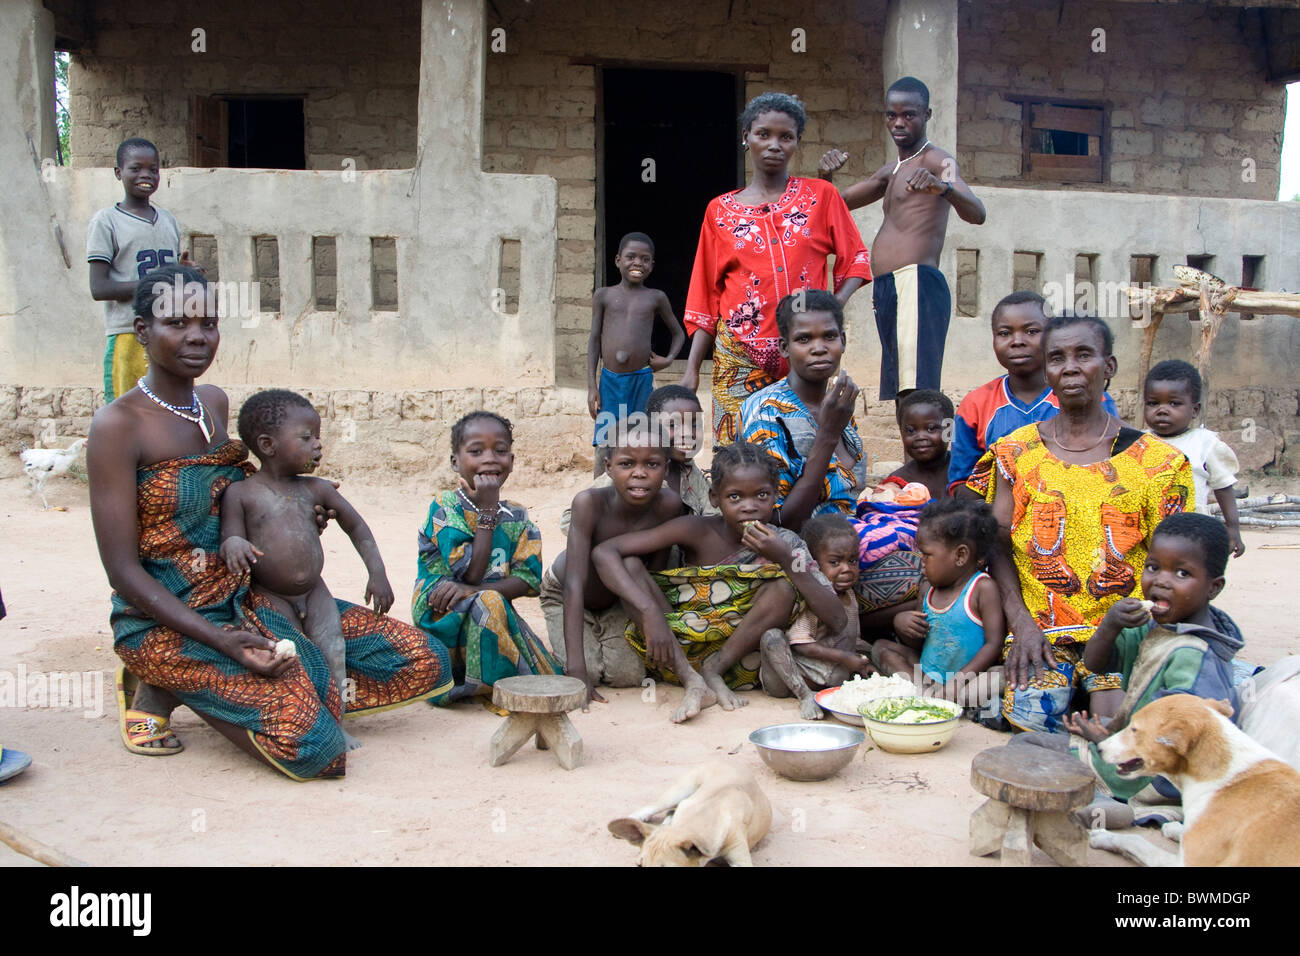 A family eating in front of his hut Central African Republic Stock Photo